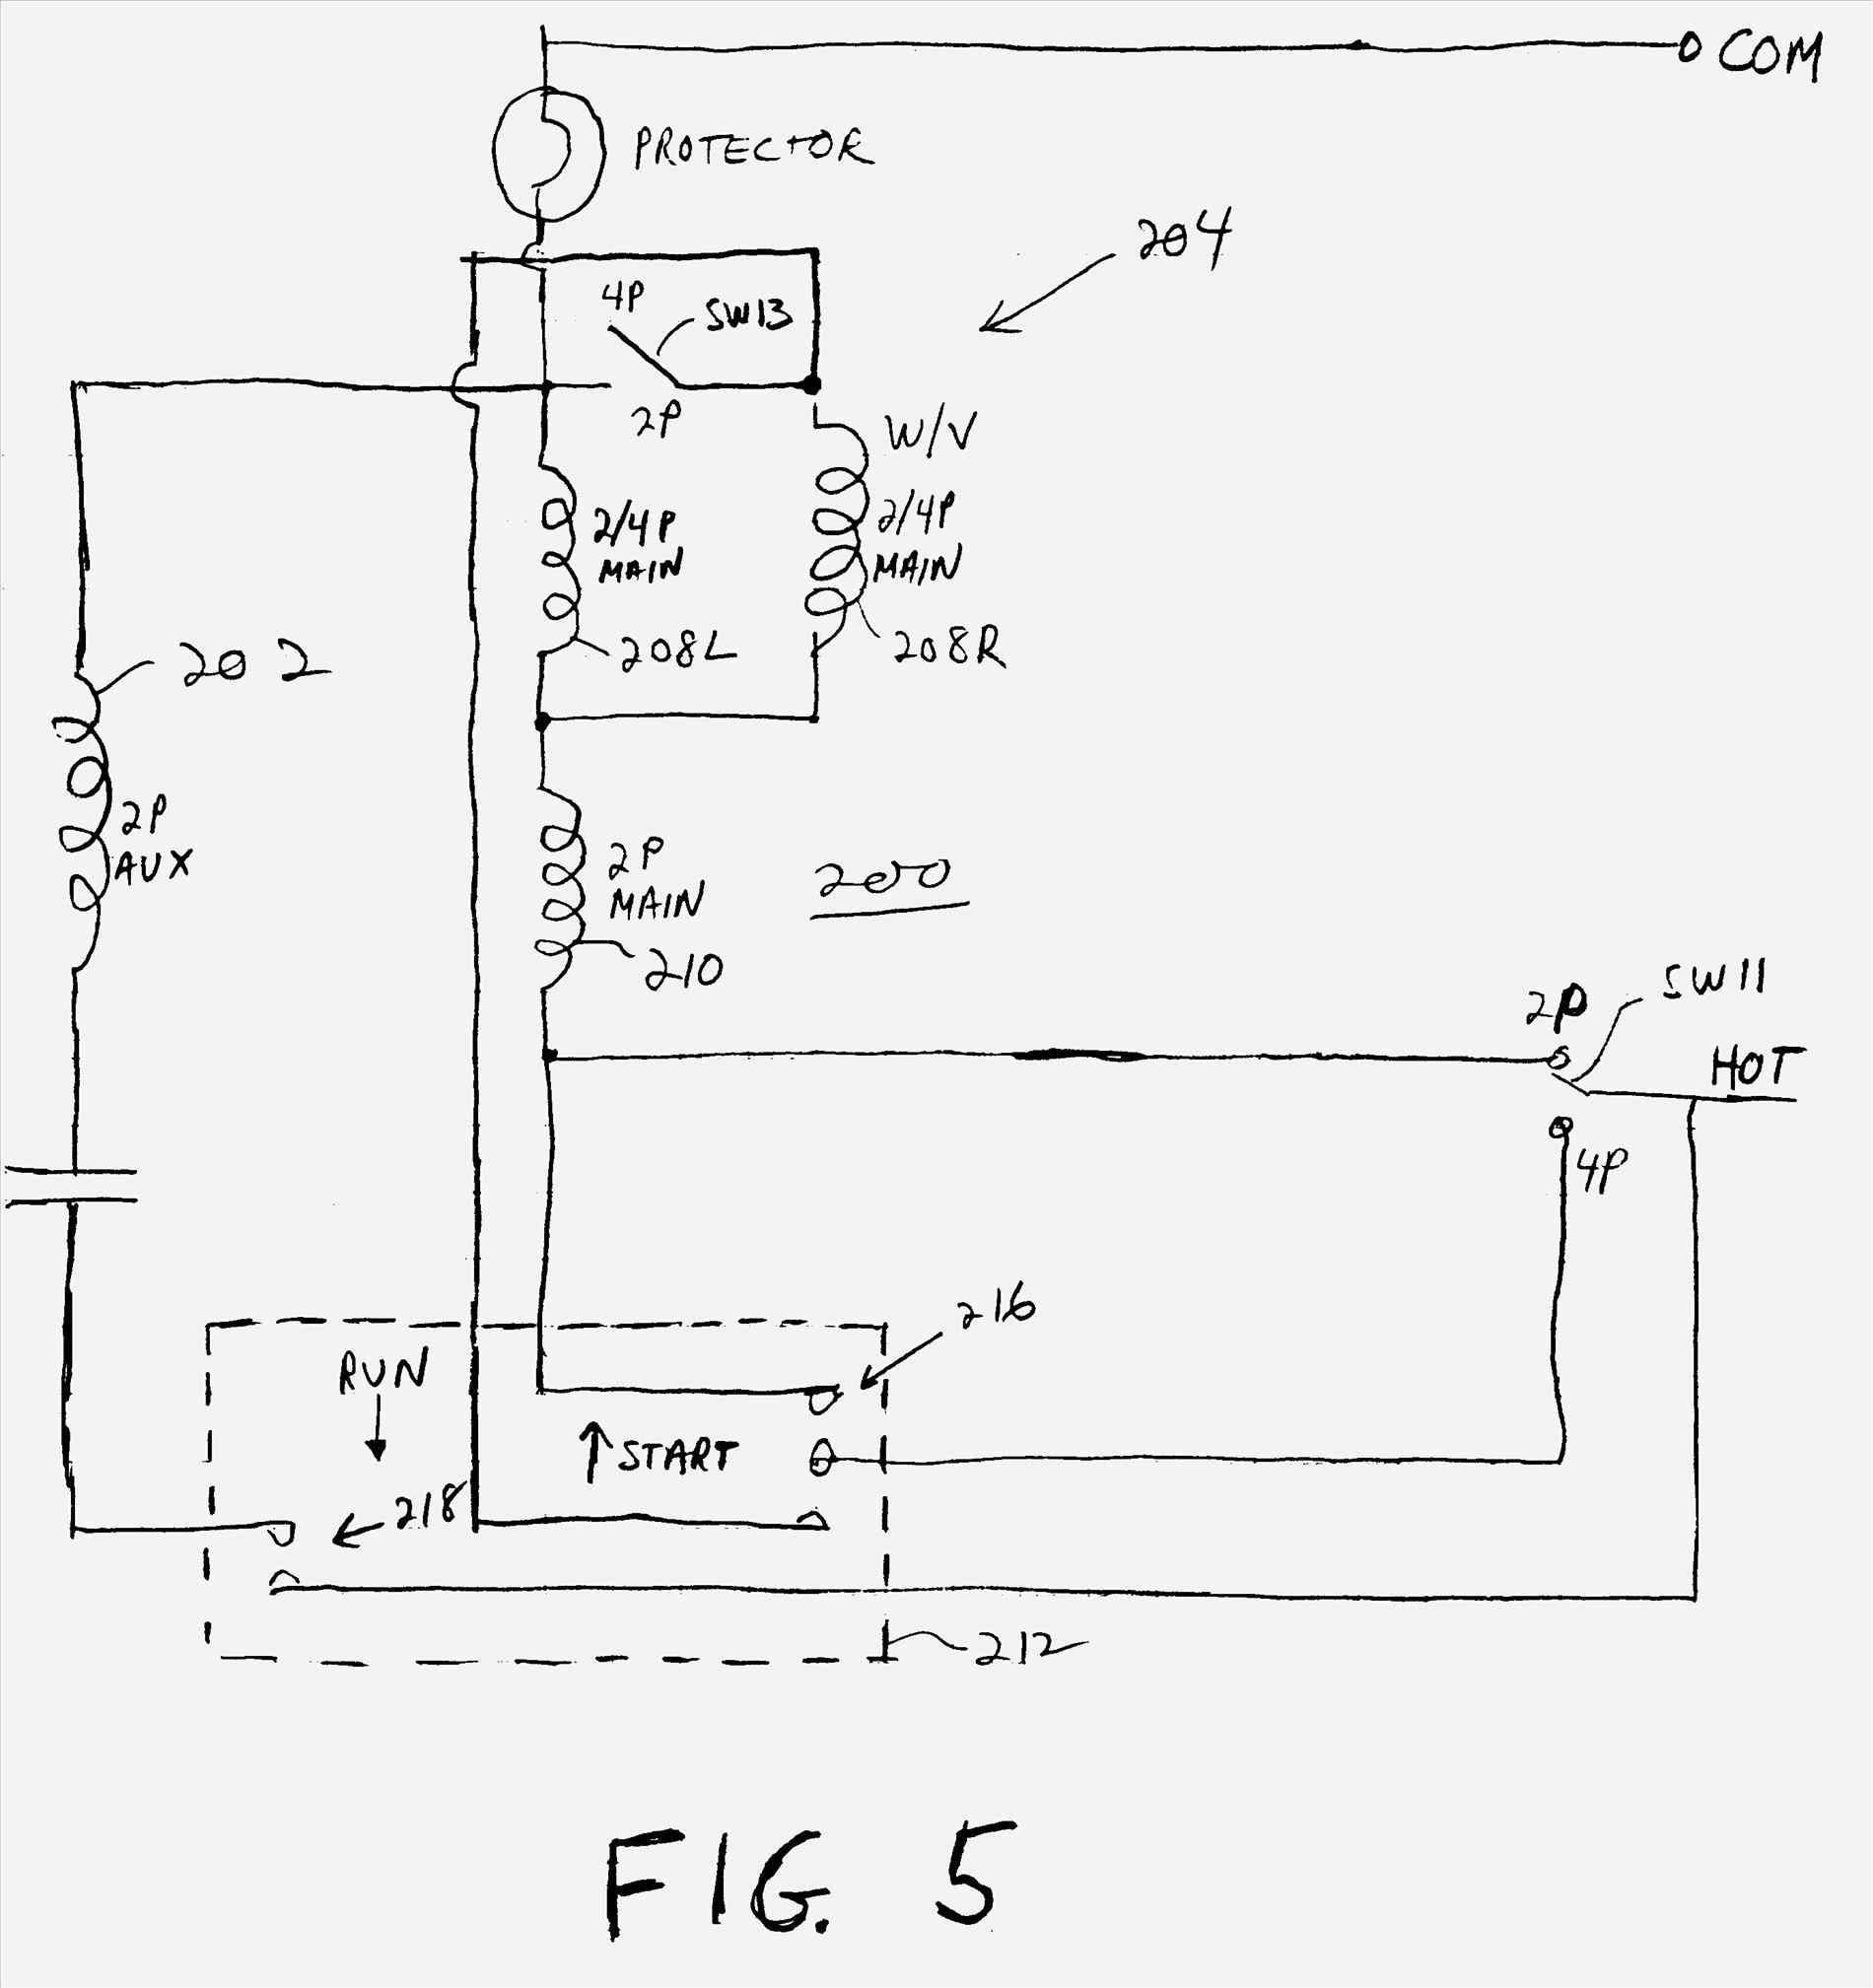 Champion Winch Wiring Diagram Winch Motor Wiring Diagram for Generator Worksheet and Wiring Of Champion Winch Wiring Diagram